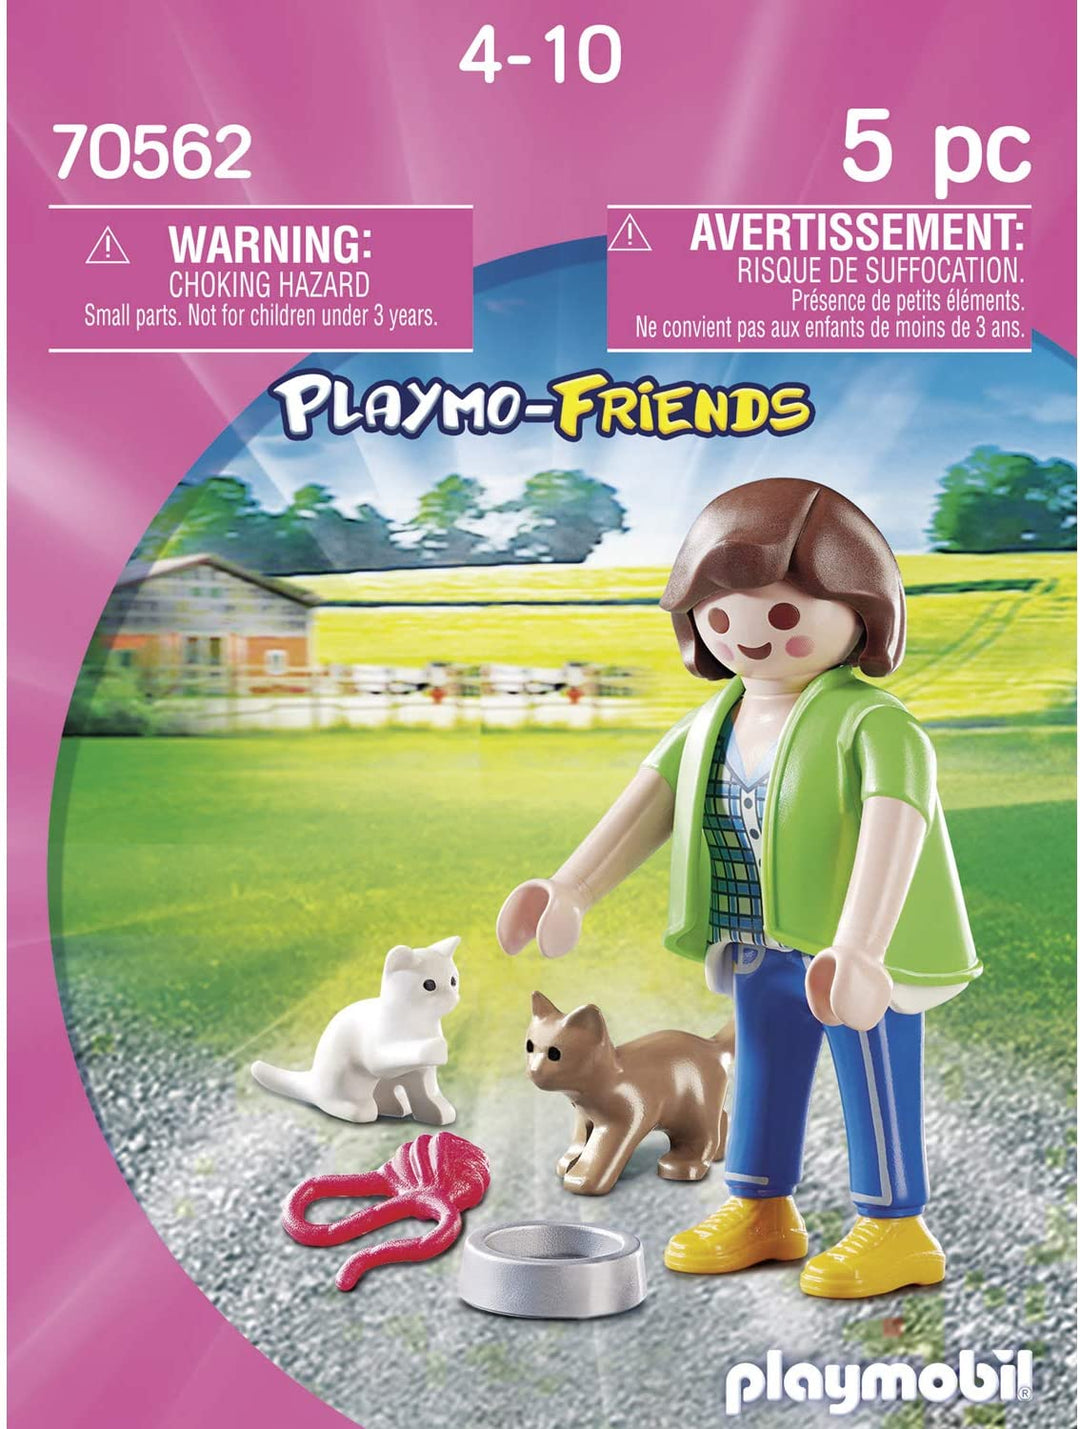 Playmobil 70562 Playmo-Friends Boy with RC Car, for Children Ages 4+